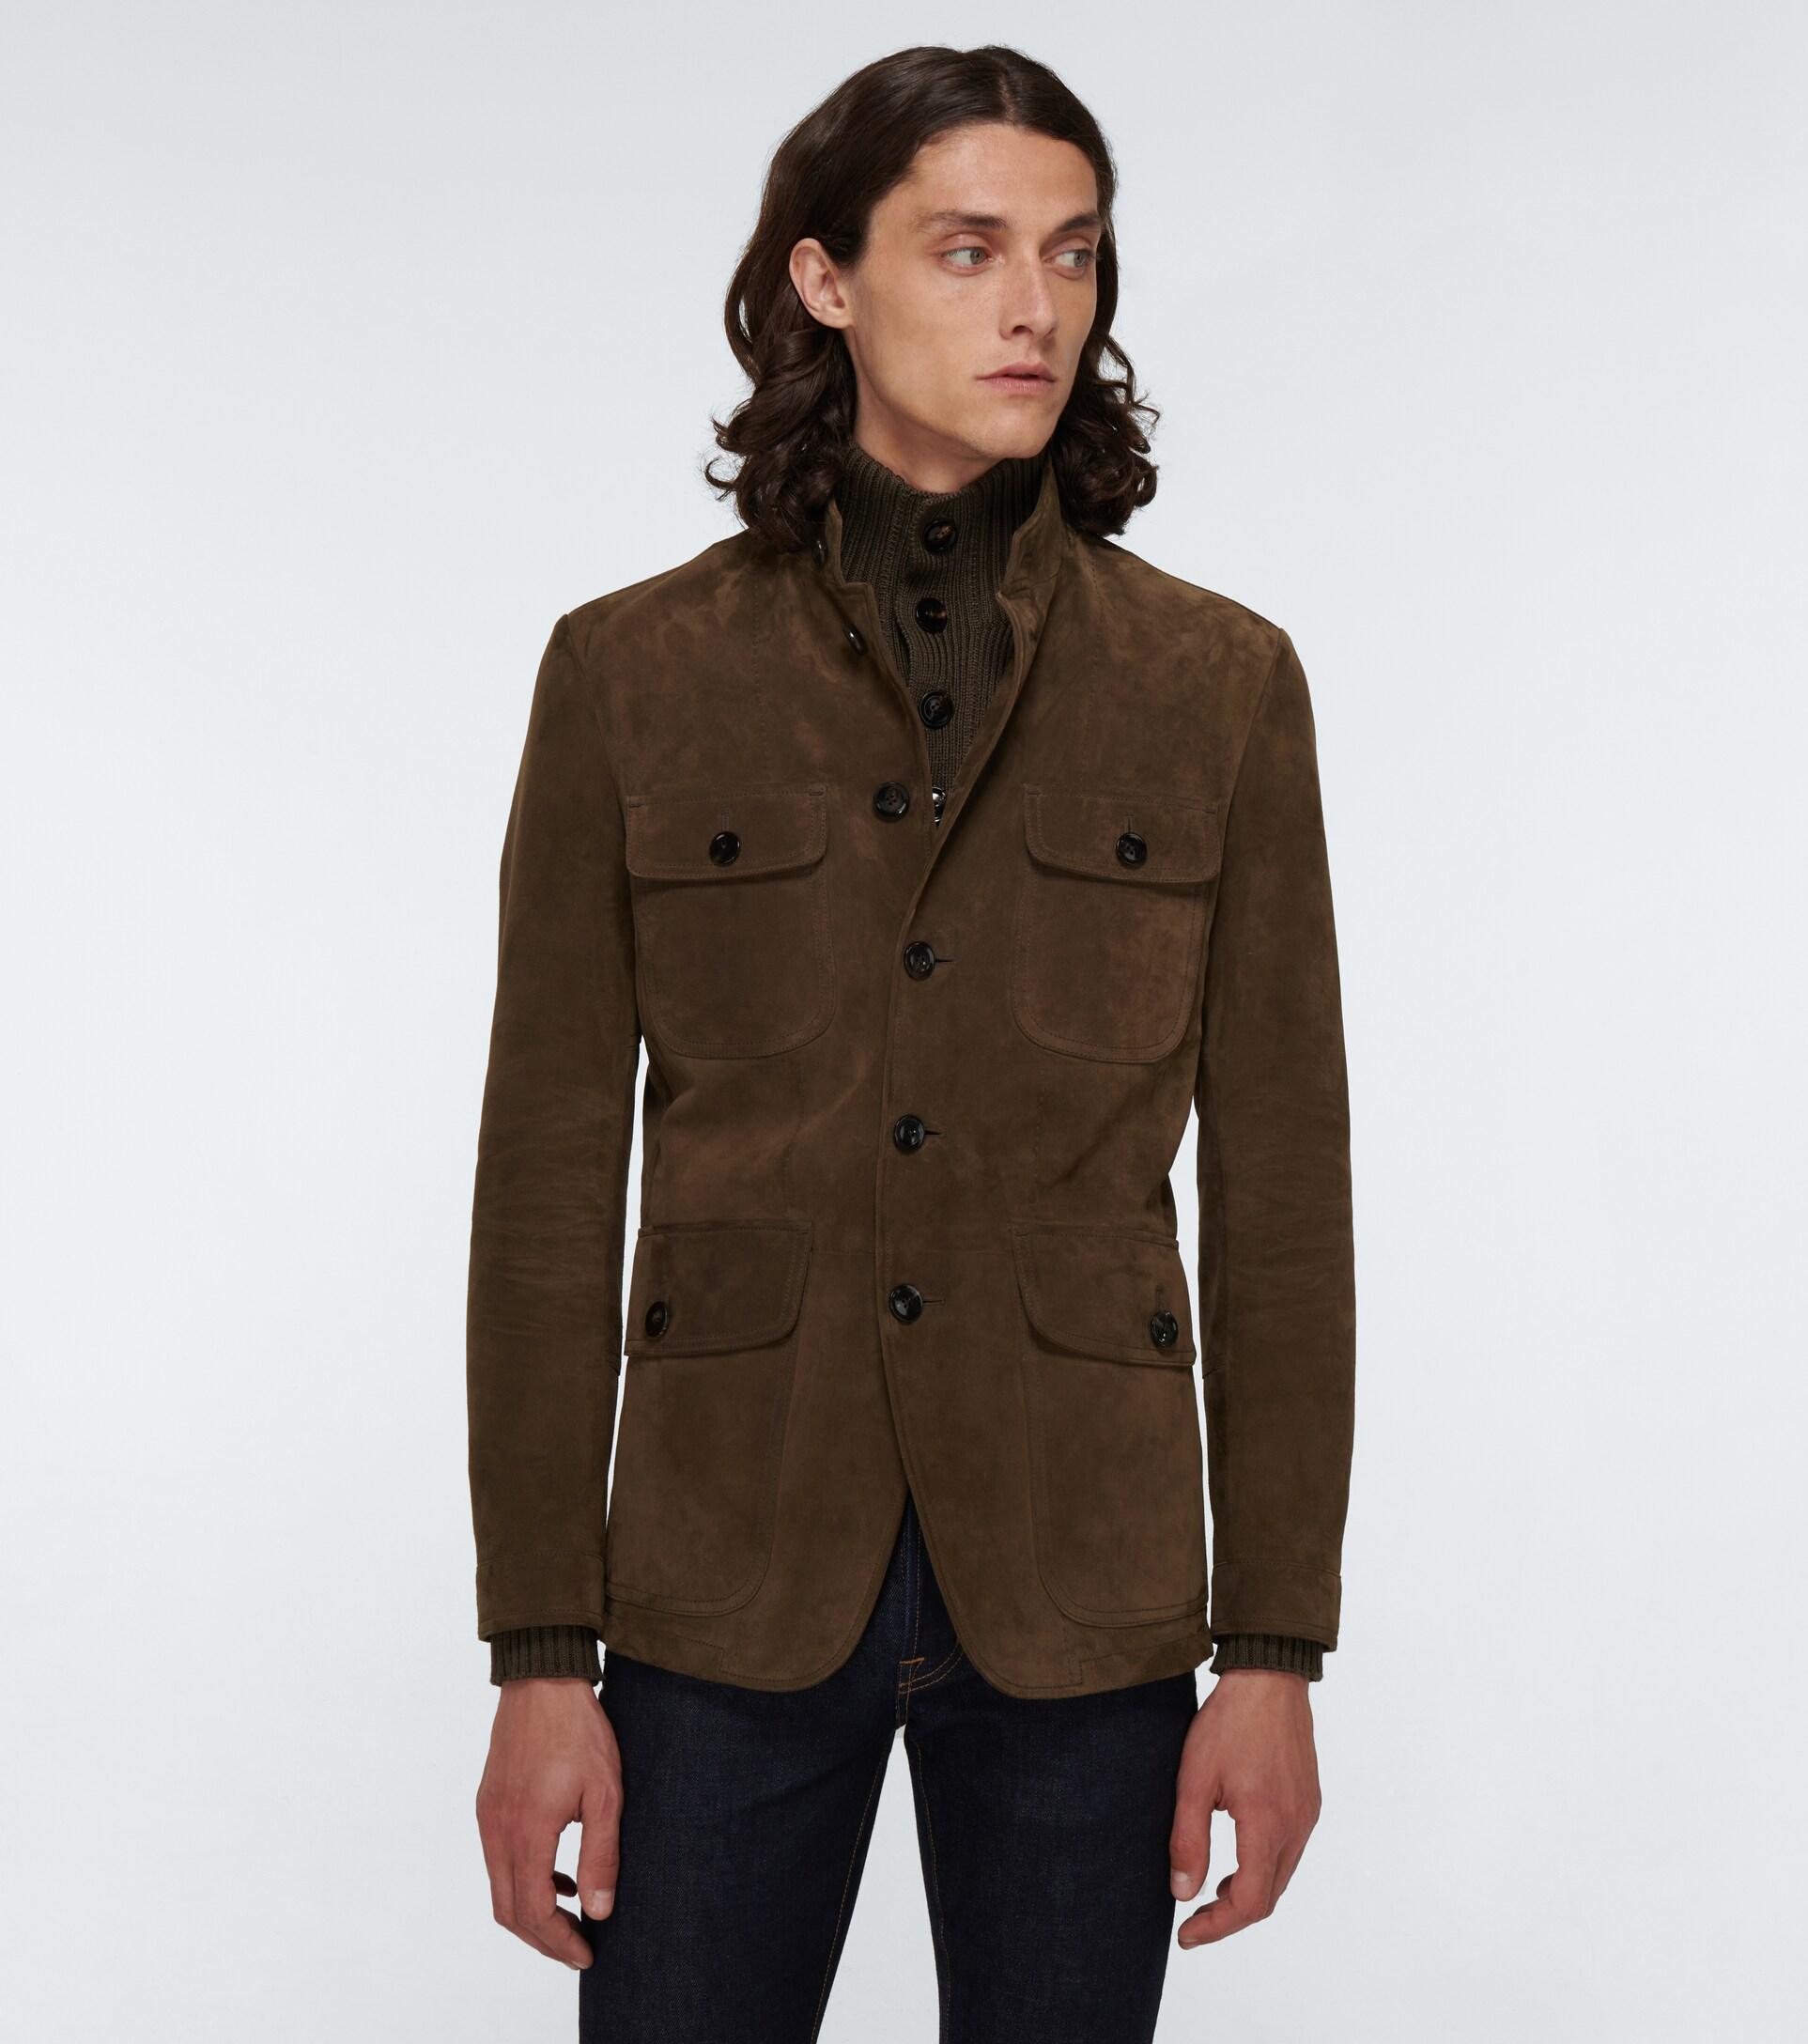 TOM FORD Men's Suede Military Jacket